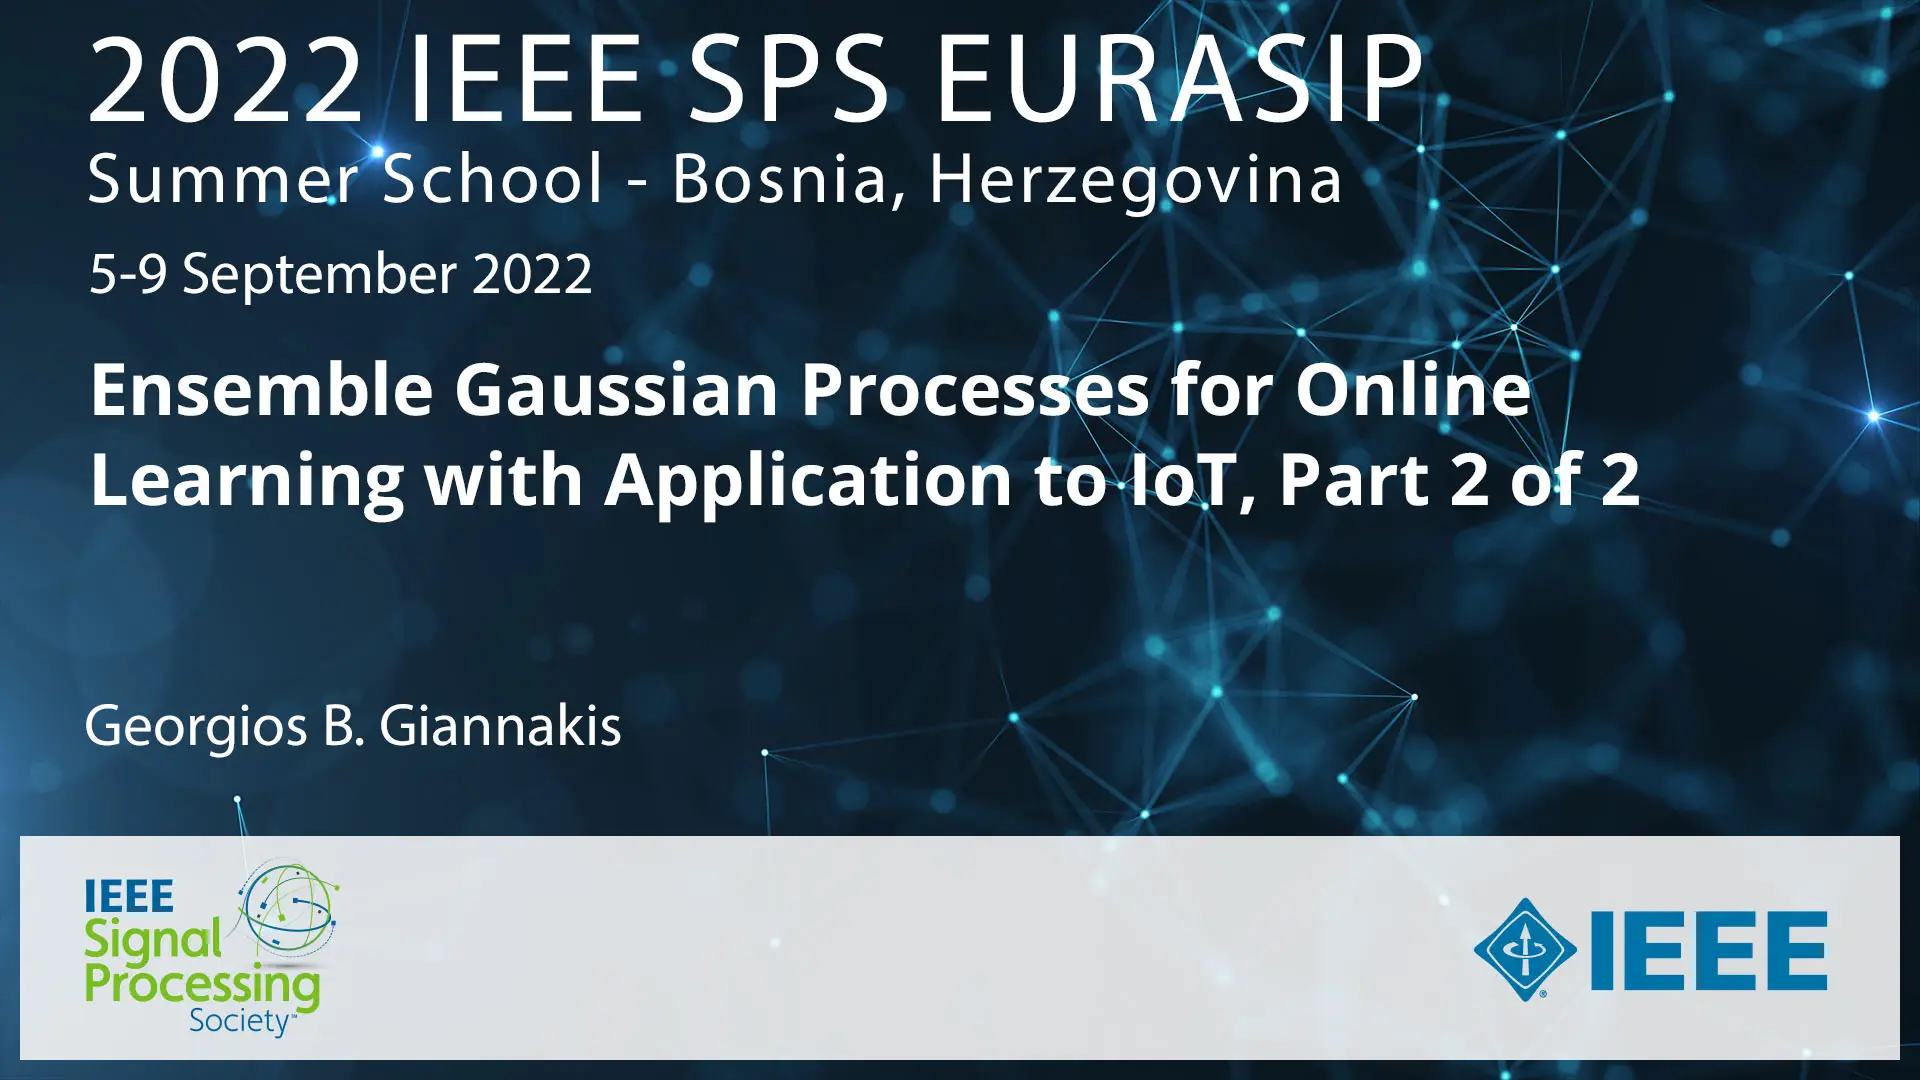 Ensemble Gaussian Processes for Online Learning with Application to IoT, Part 2 of 2